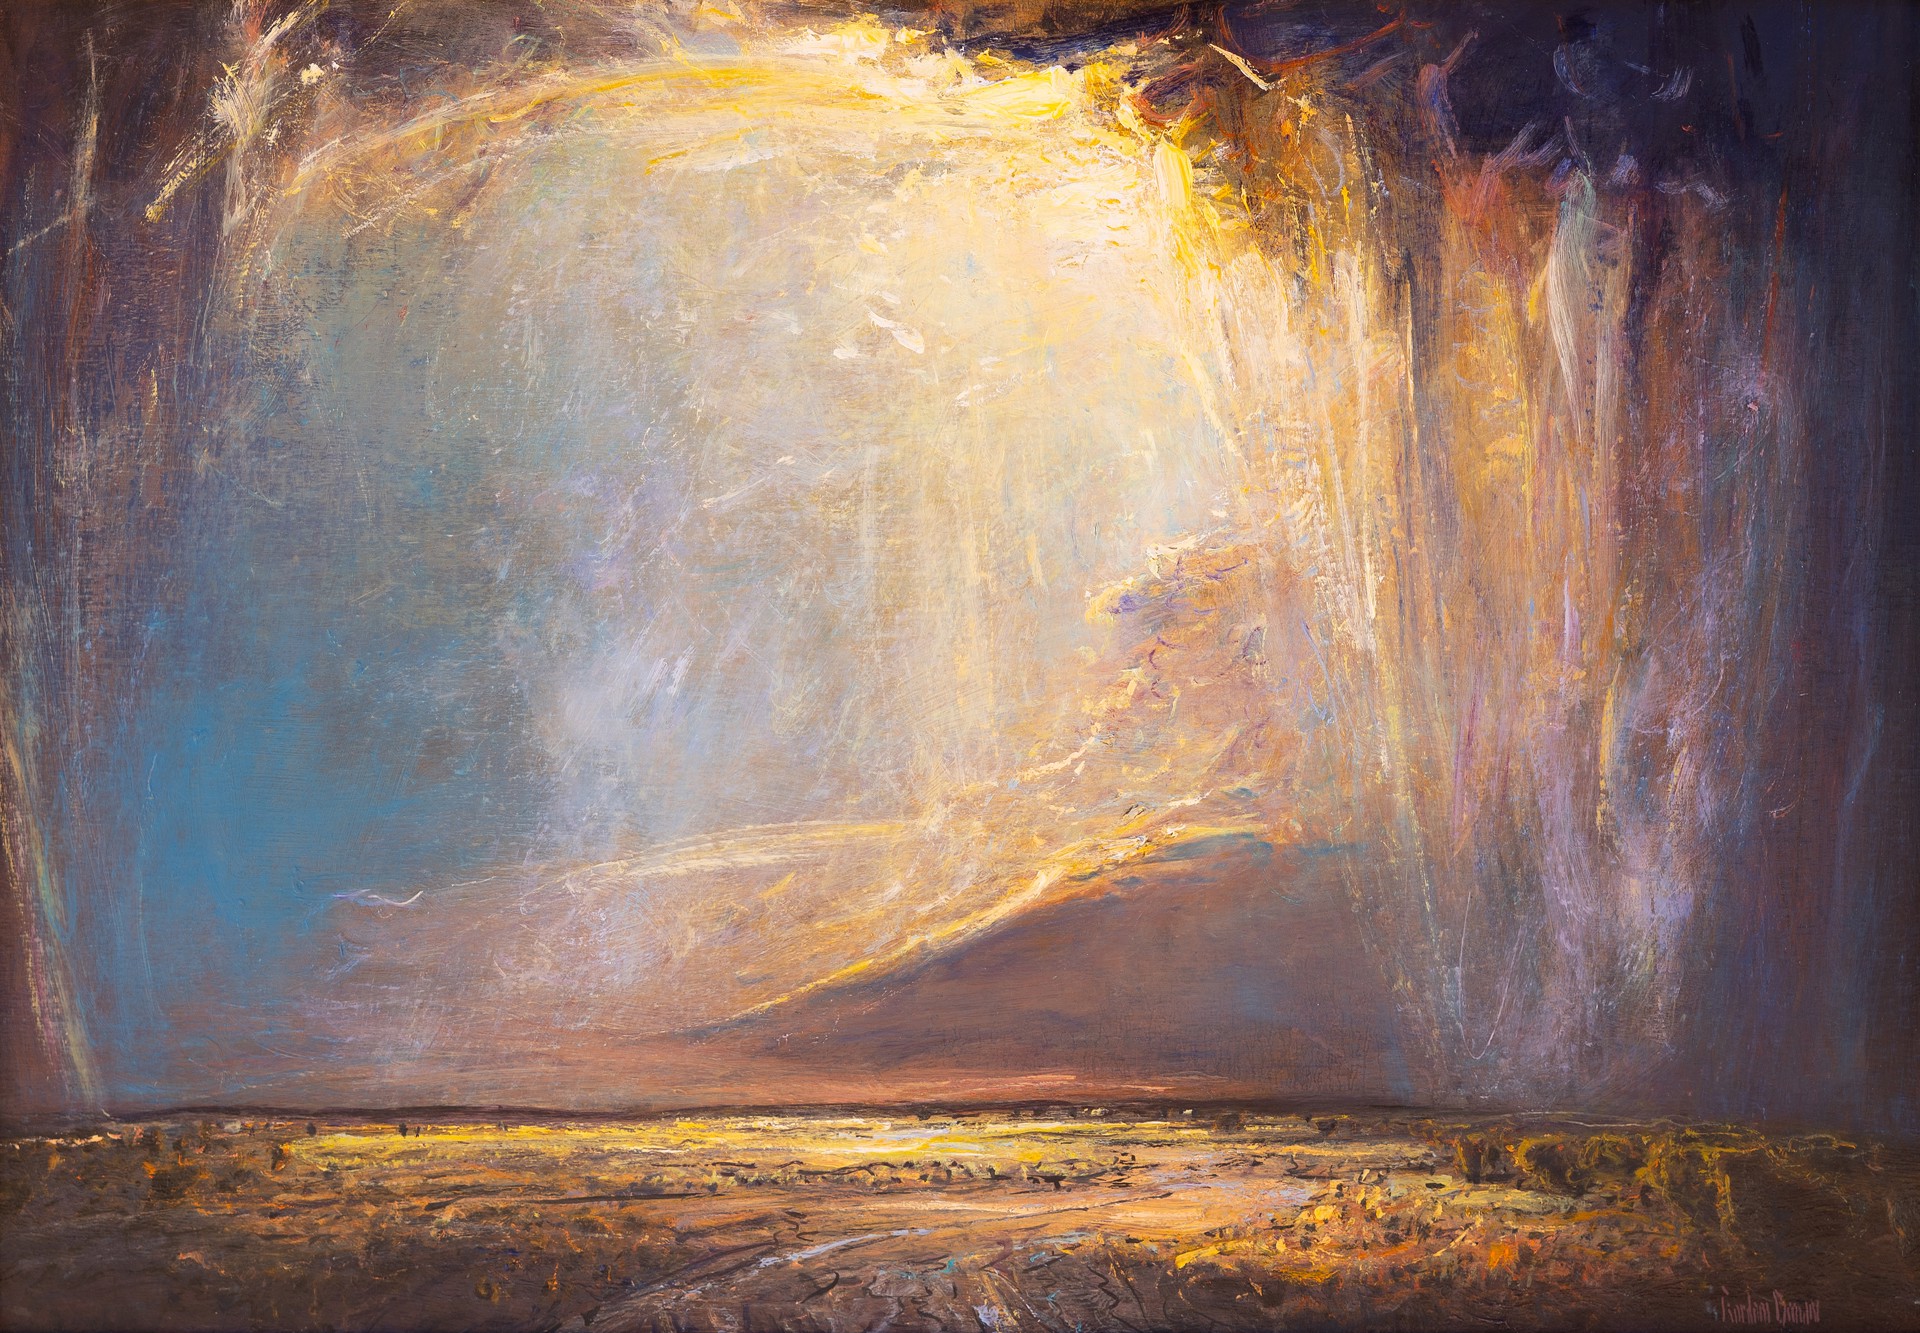 Light in the Storm by Gordon Brown